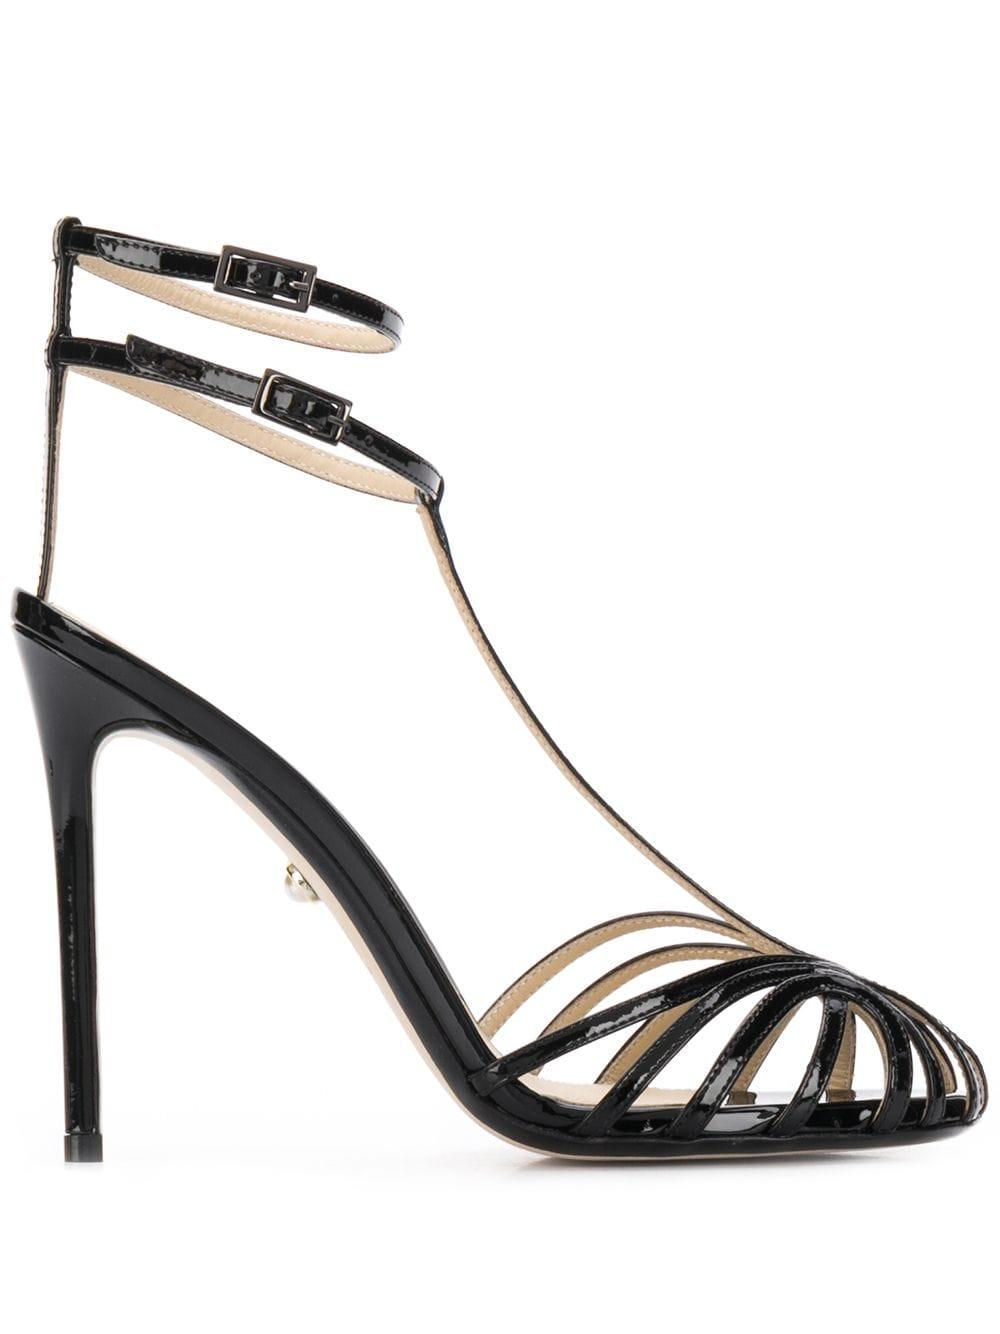 ALEVI Leather Stella Strappy Sandals in Black - Lyst